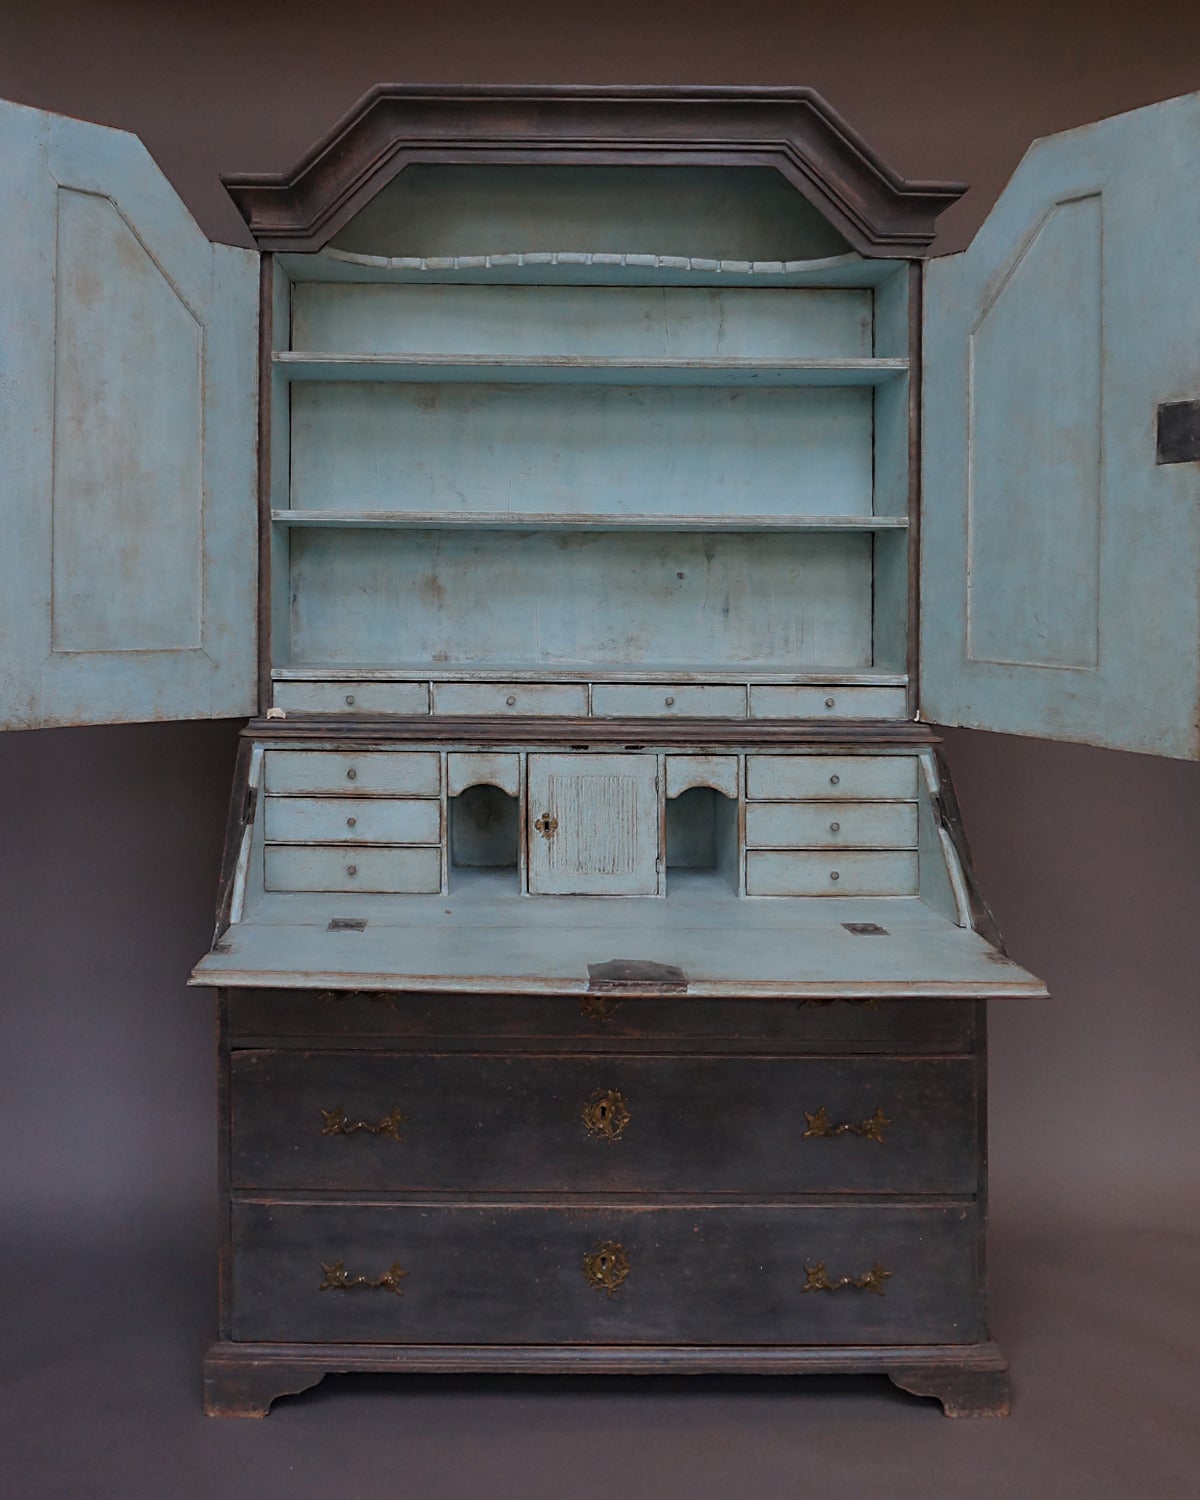 Period Swedish secretary, circa 1810 having raised panel doors with reeded detail. The lower section has a fitted interior with disguised drawers and a locking compartment, all-over three drawers and bracket base. Beautiful Rococo brass hardware on